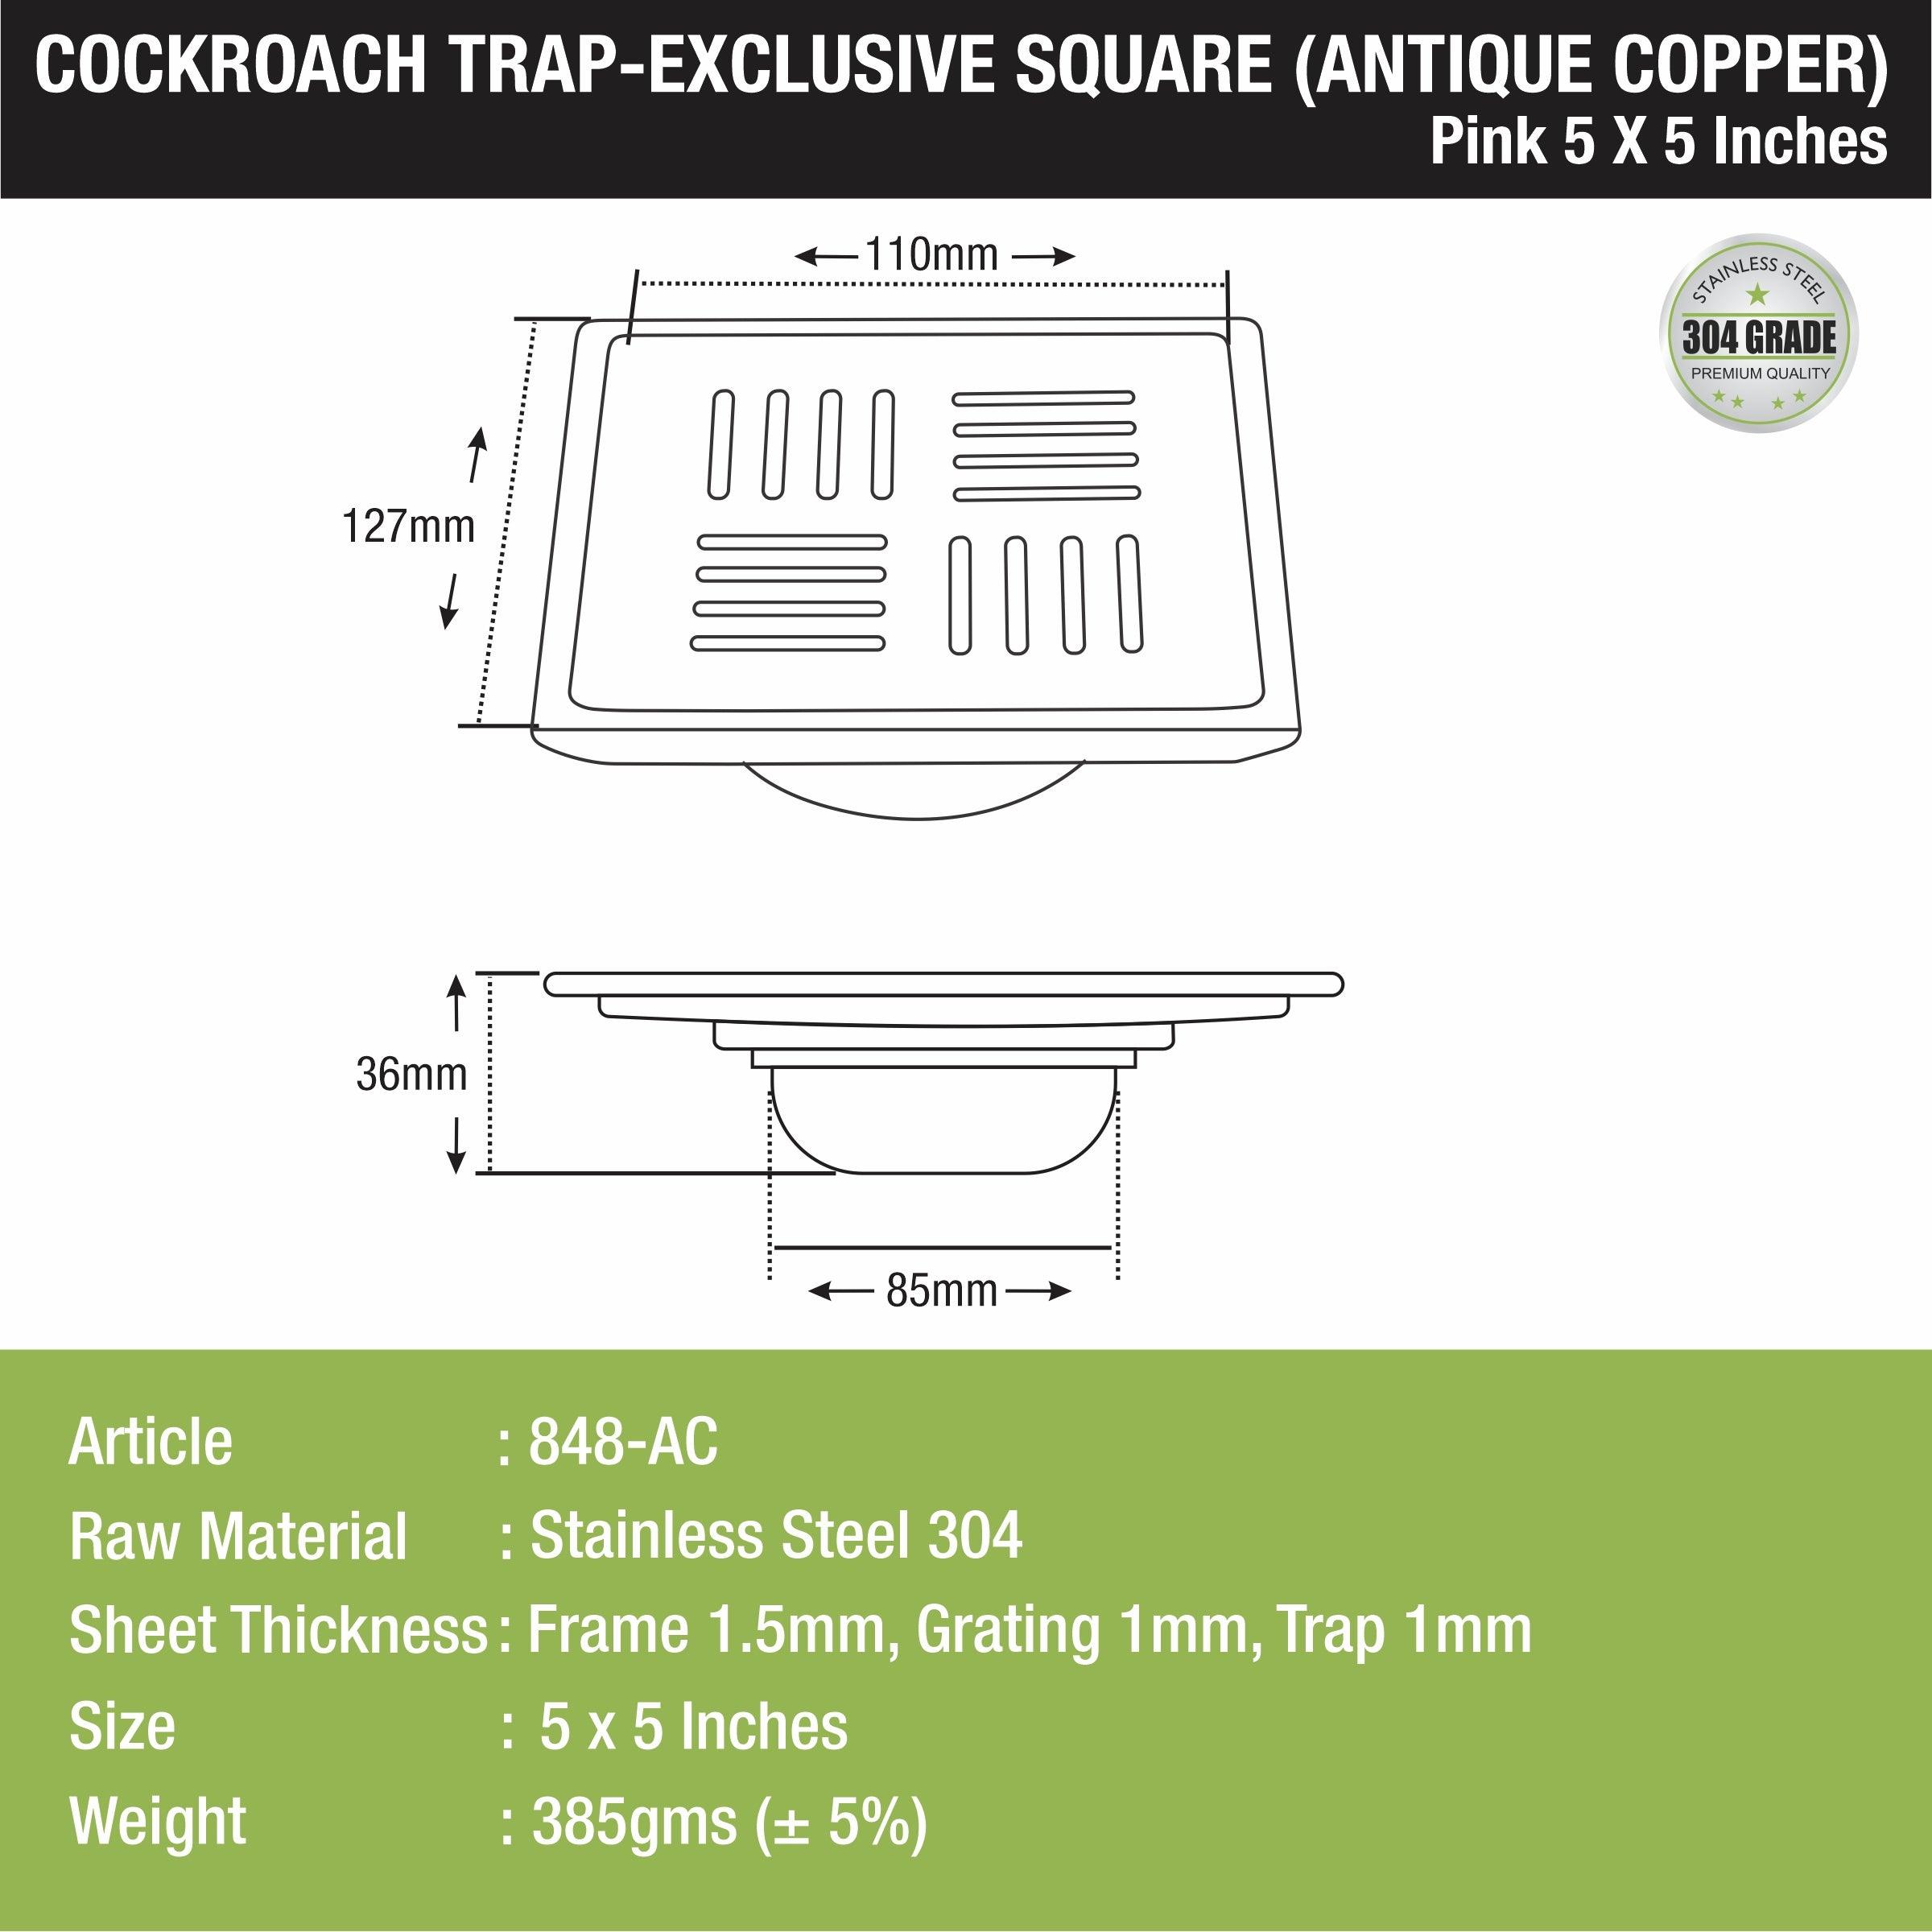 Pink Exclusive Square Floor Drain in Antique Copper PVD Coating (5 x 5 Inches) with Cockroach Trap sizes and dimensions